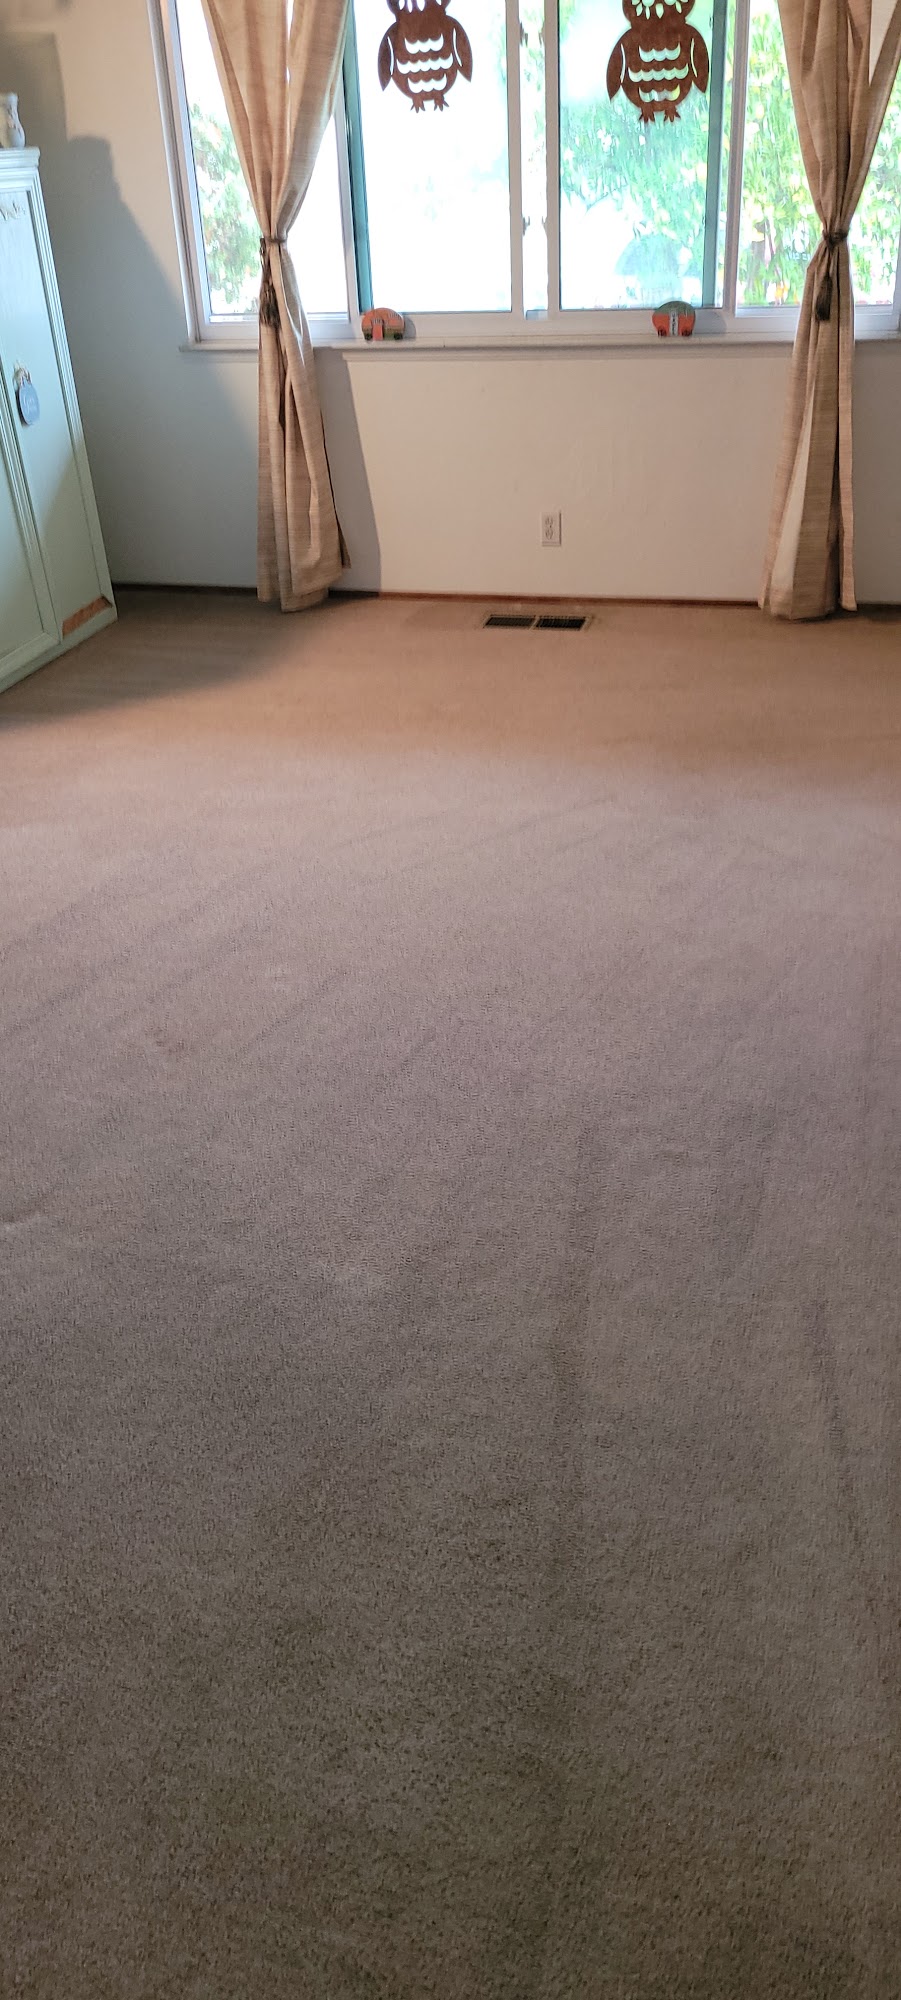 Neil's Carpet Cleaning